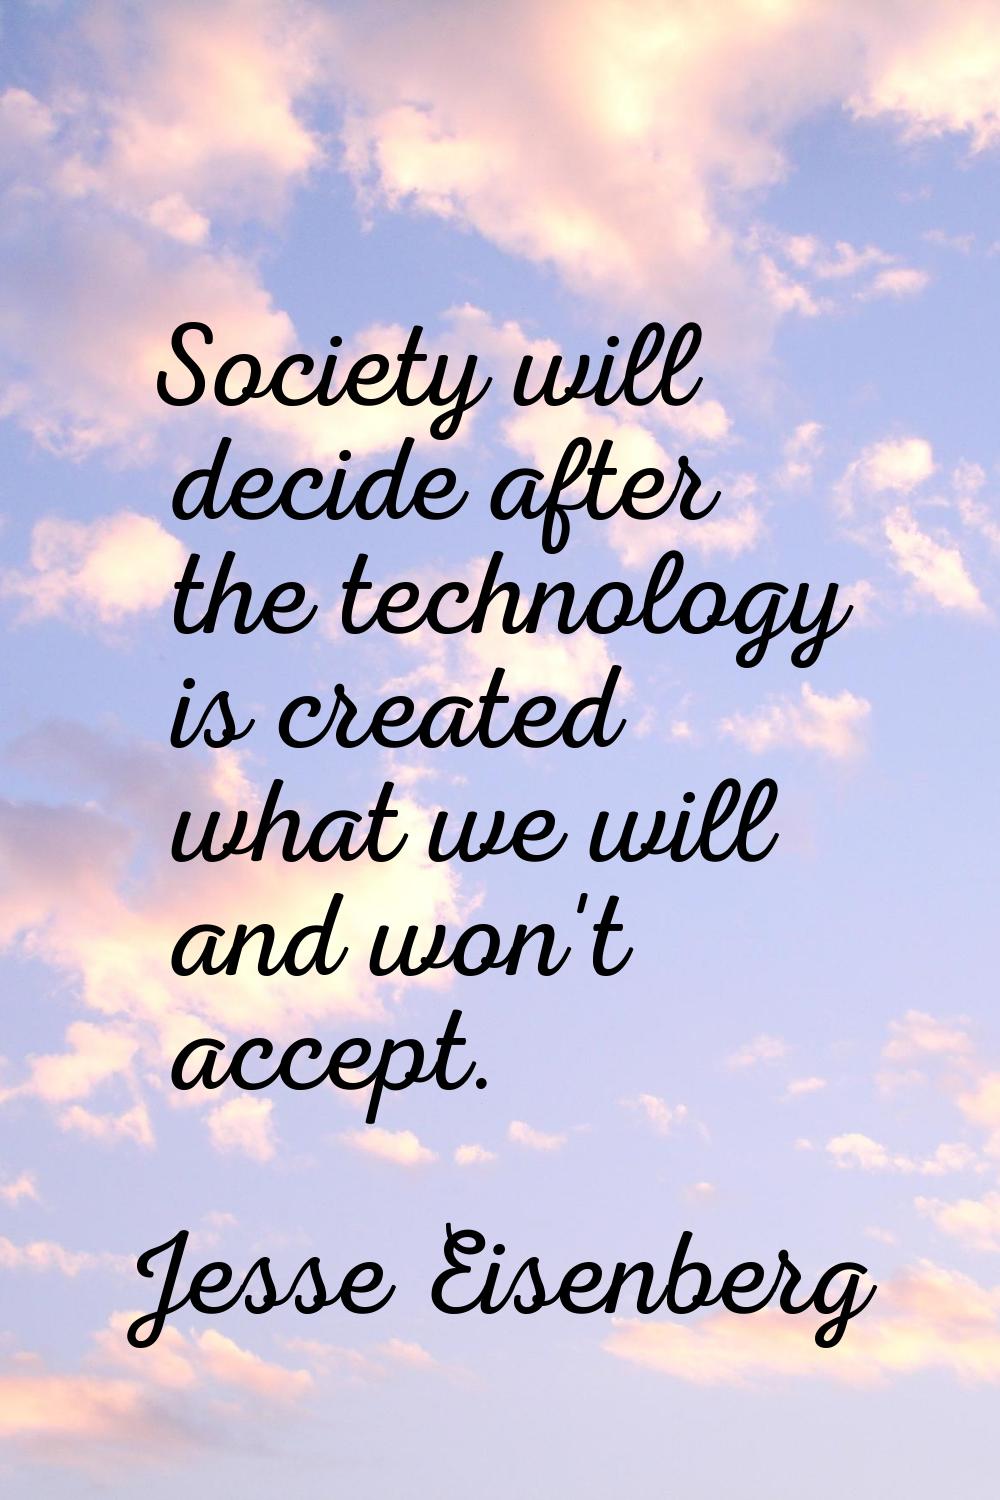 Society will decide after the technology is created what we will and won't accept.